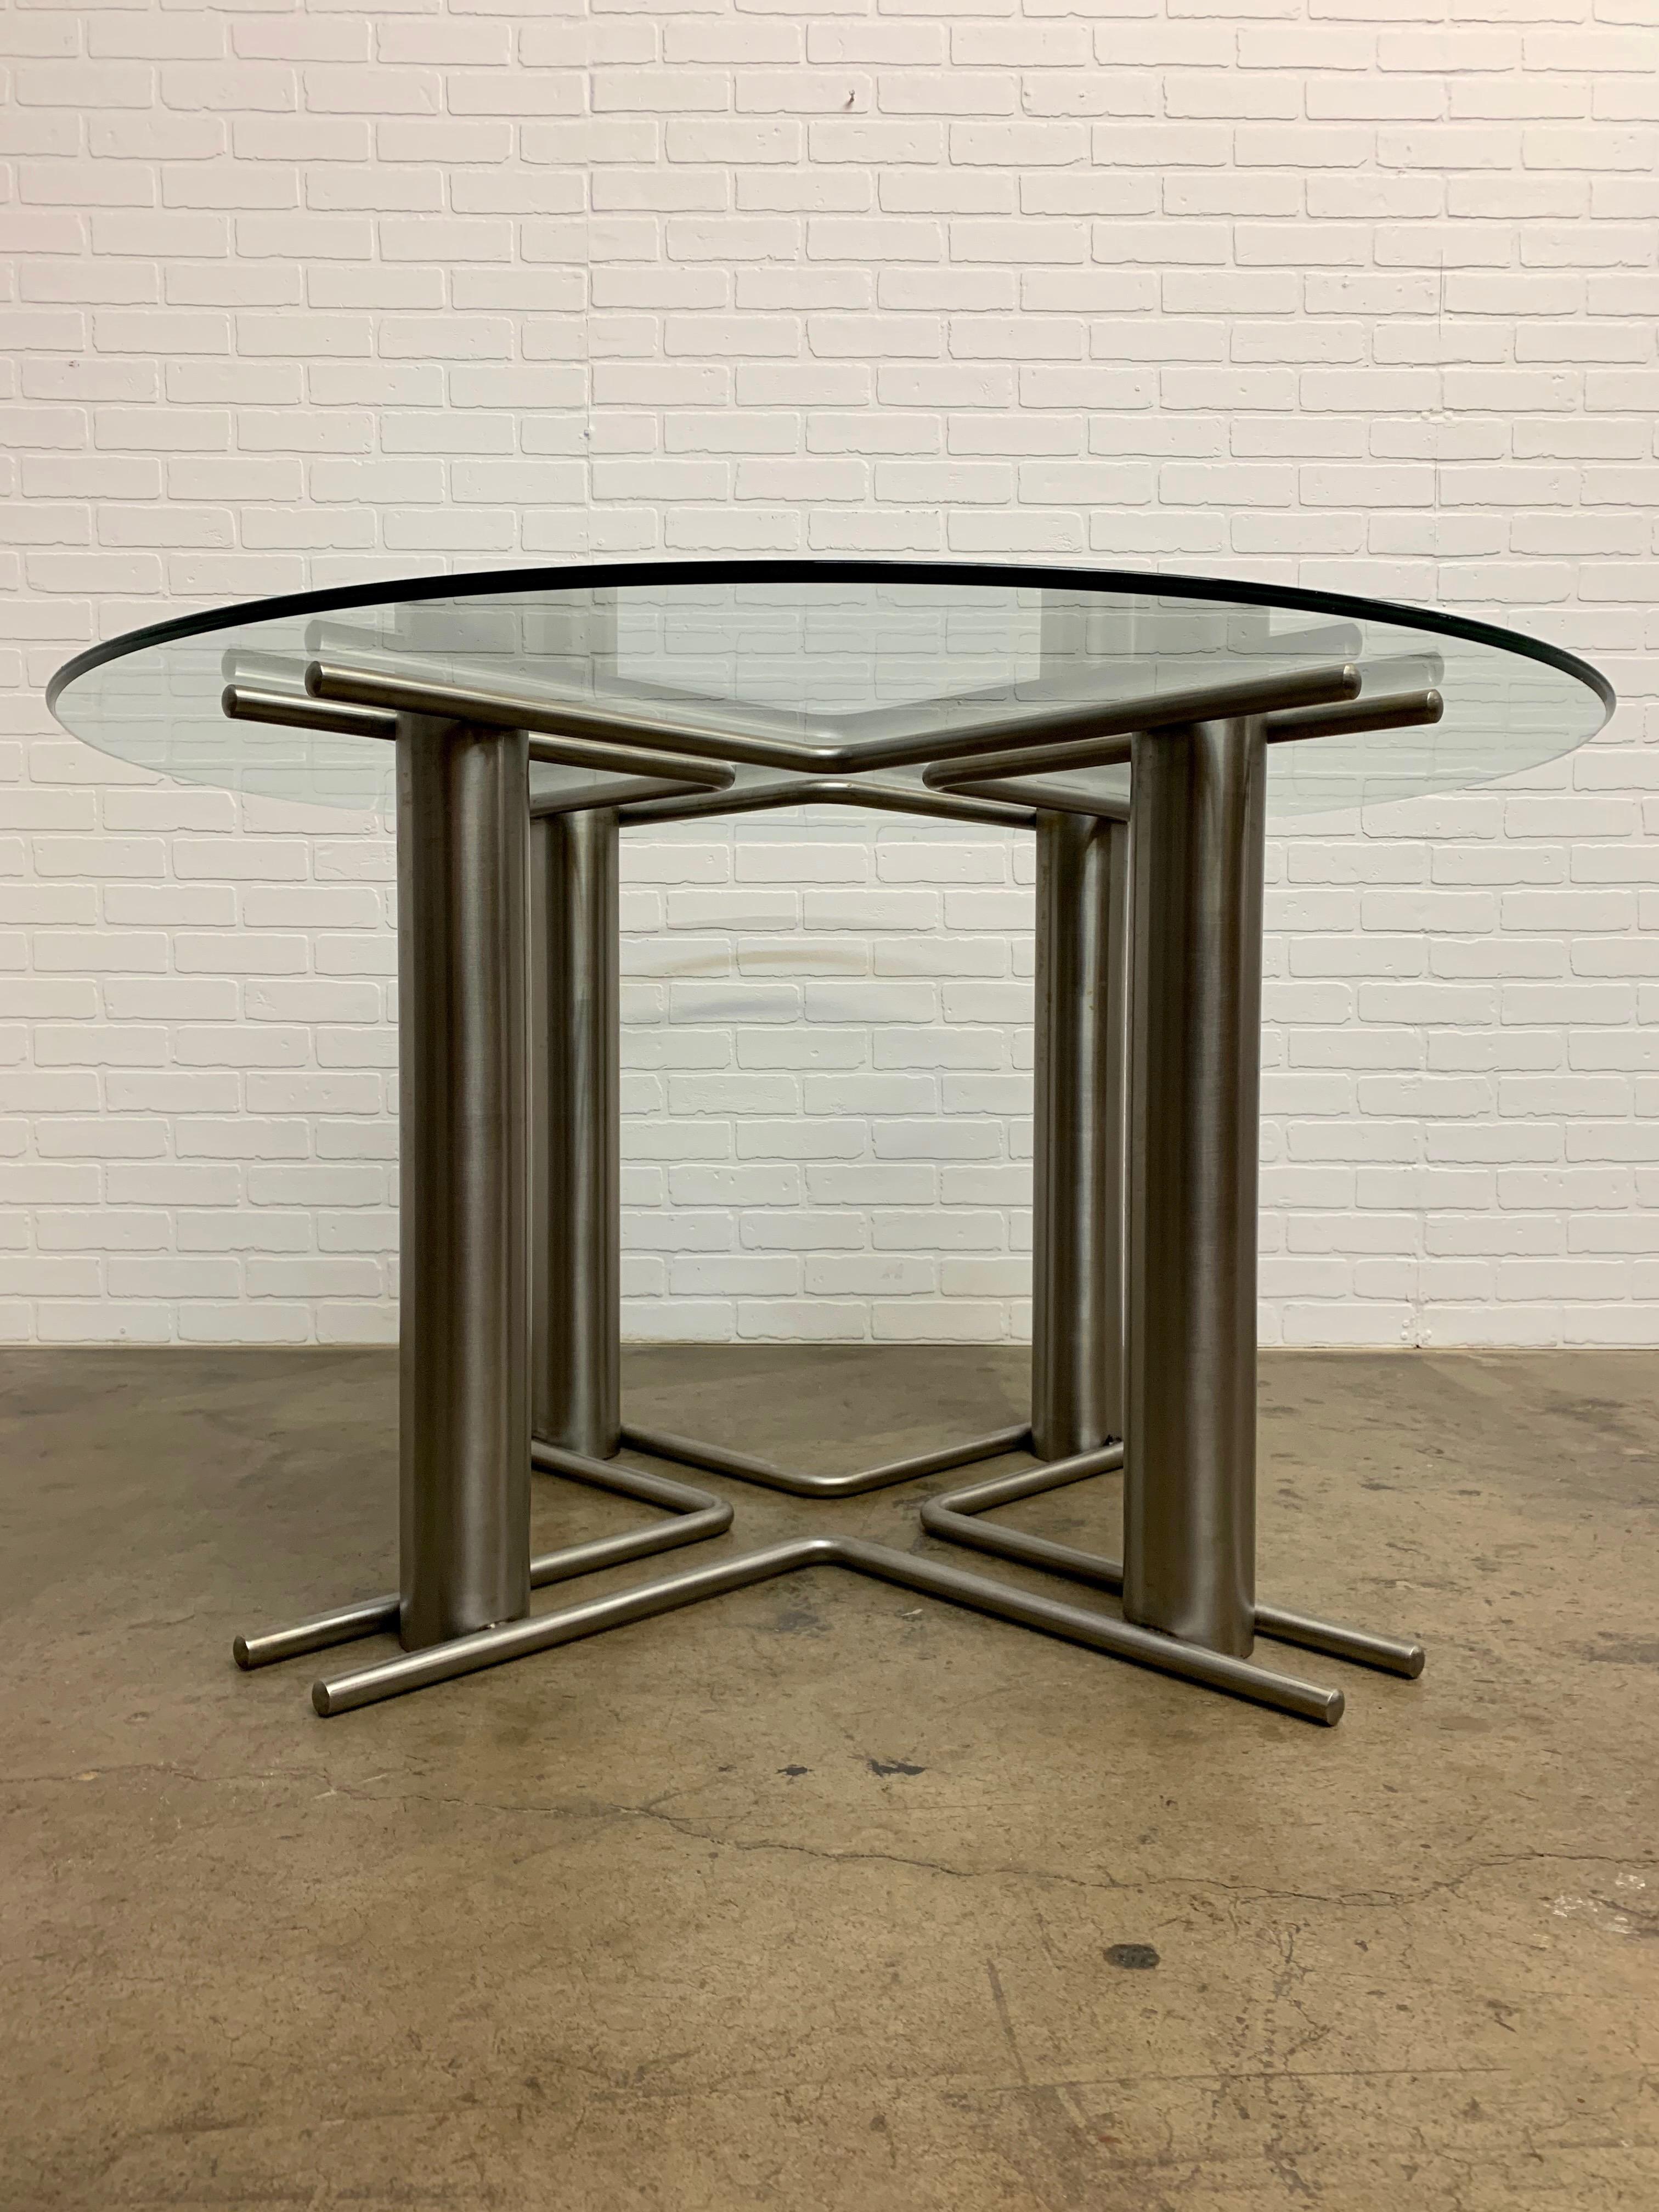 Very sturdy modern stainless steel dining table X-base. Glass is optional.